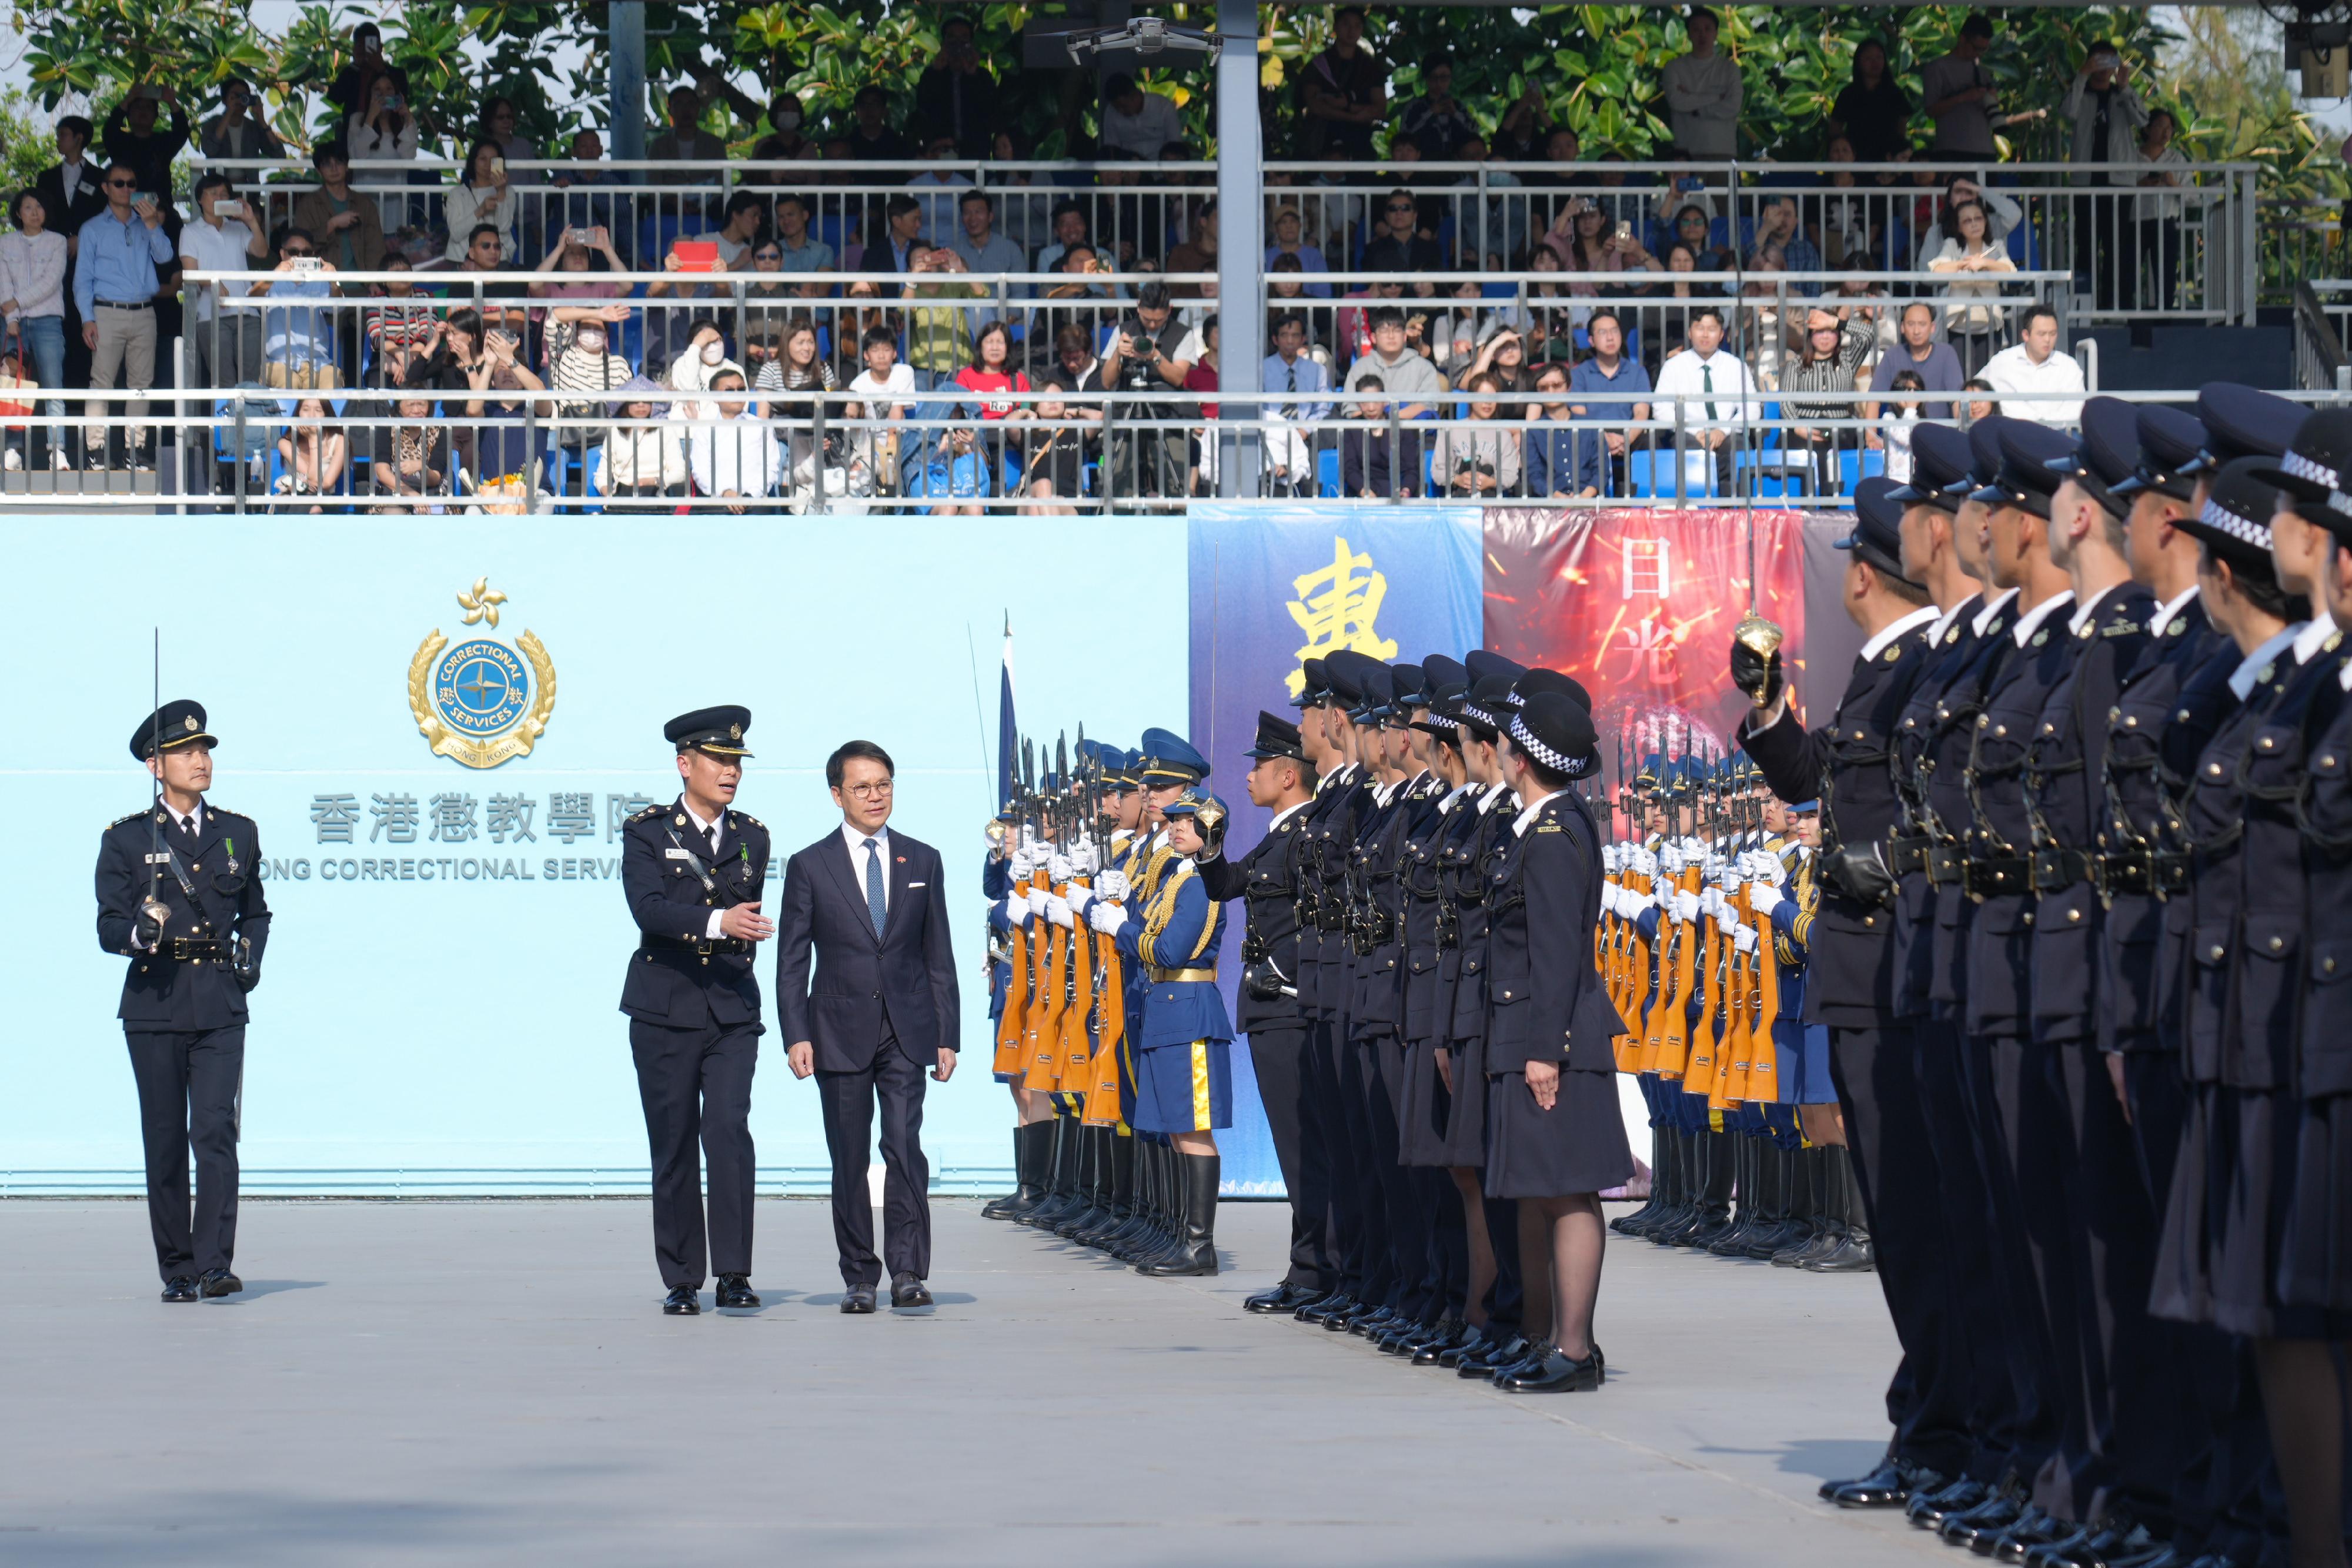 The Correctional Services Department held a passing-out parade at the Hong Kong Correctional Services Academy today (March 22). Photo shows the Chairman of the Legislative Council Panel on Security, Mr Chan Hak-kan (centre), inspecting a contingent of graduates.